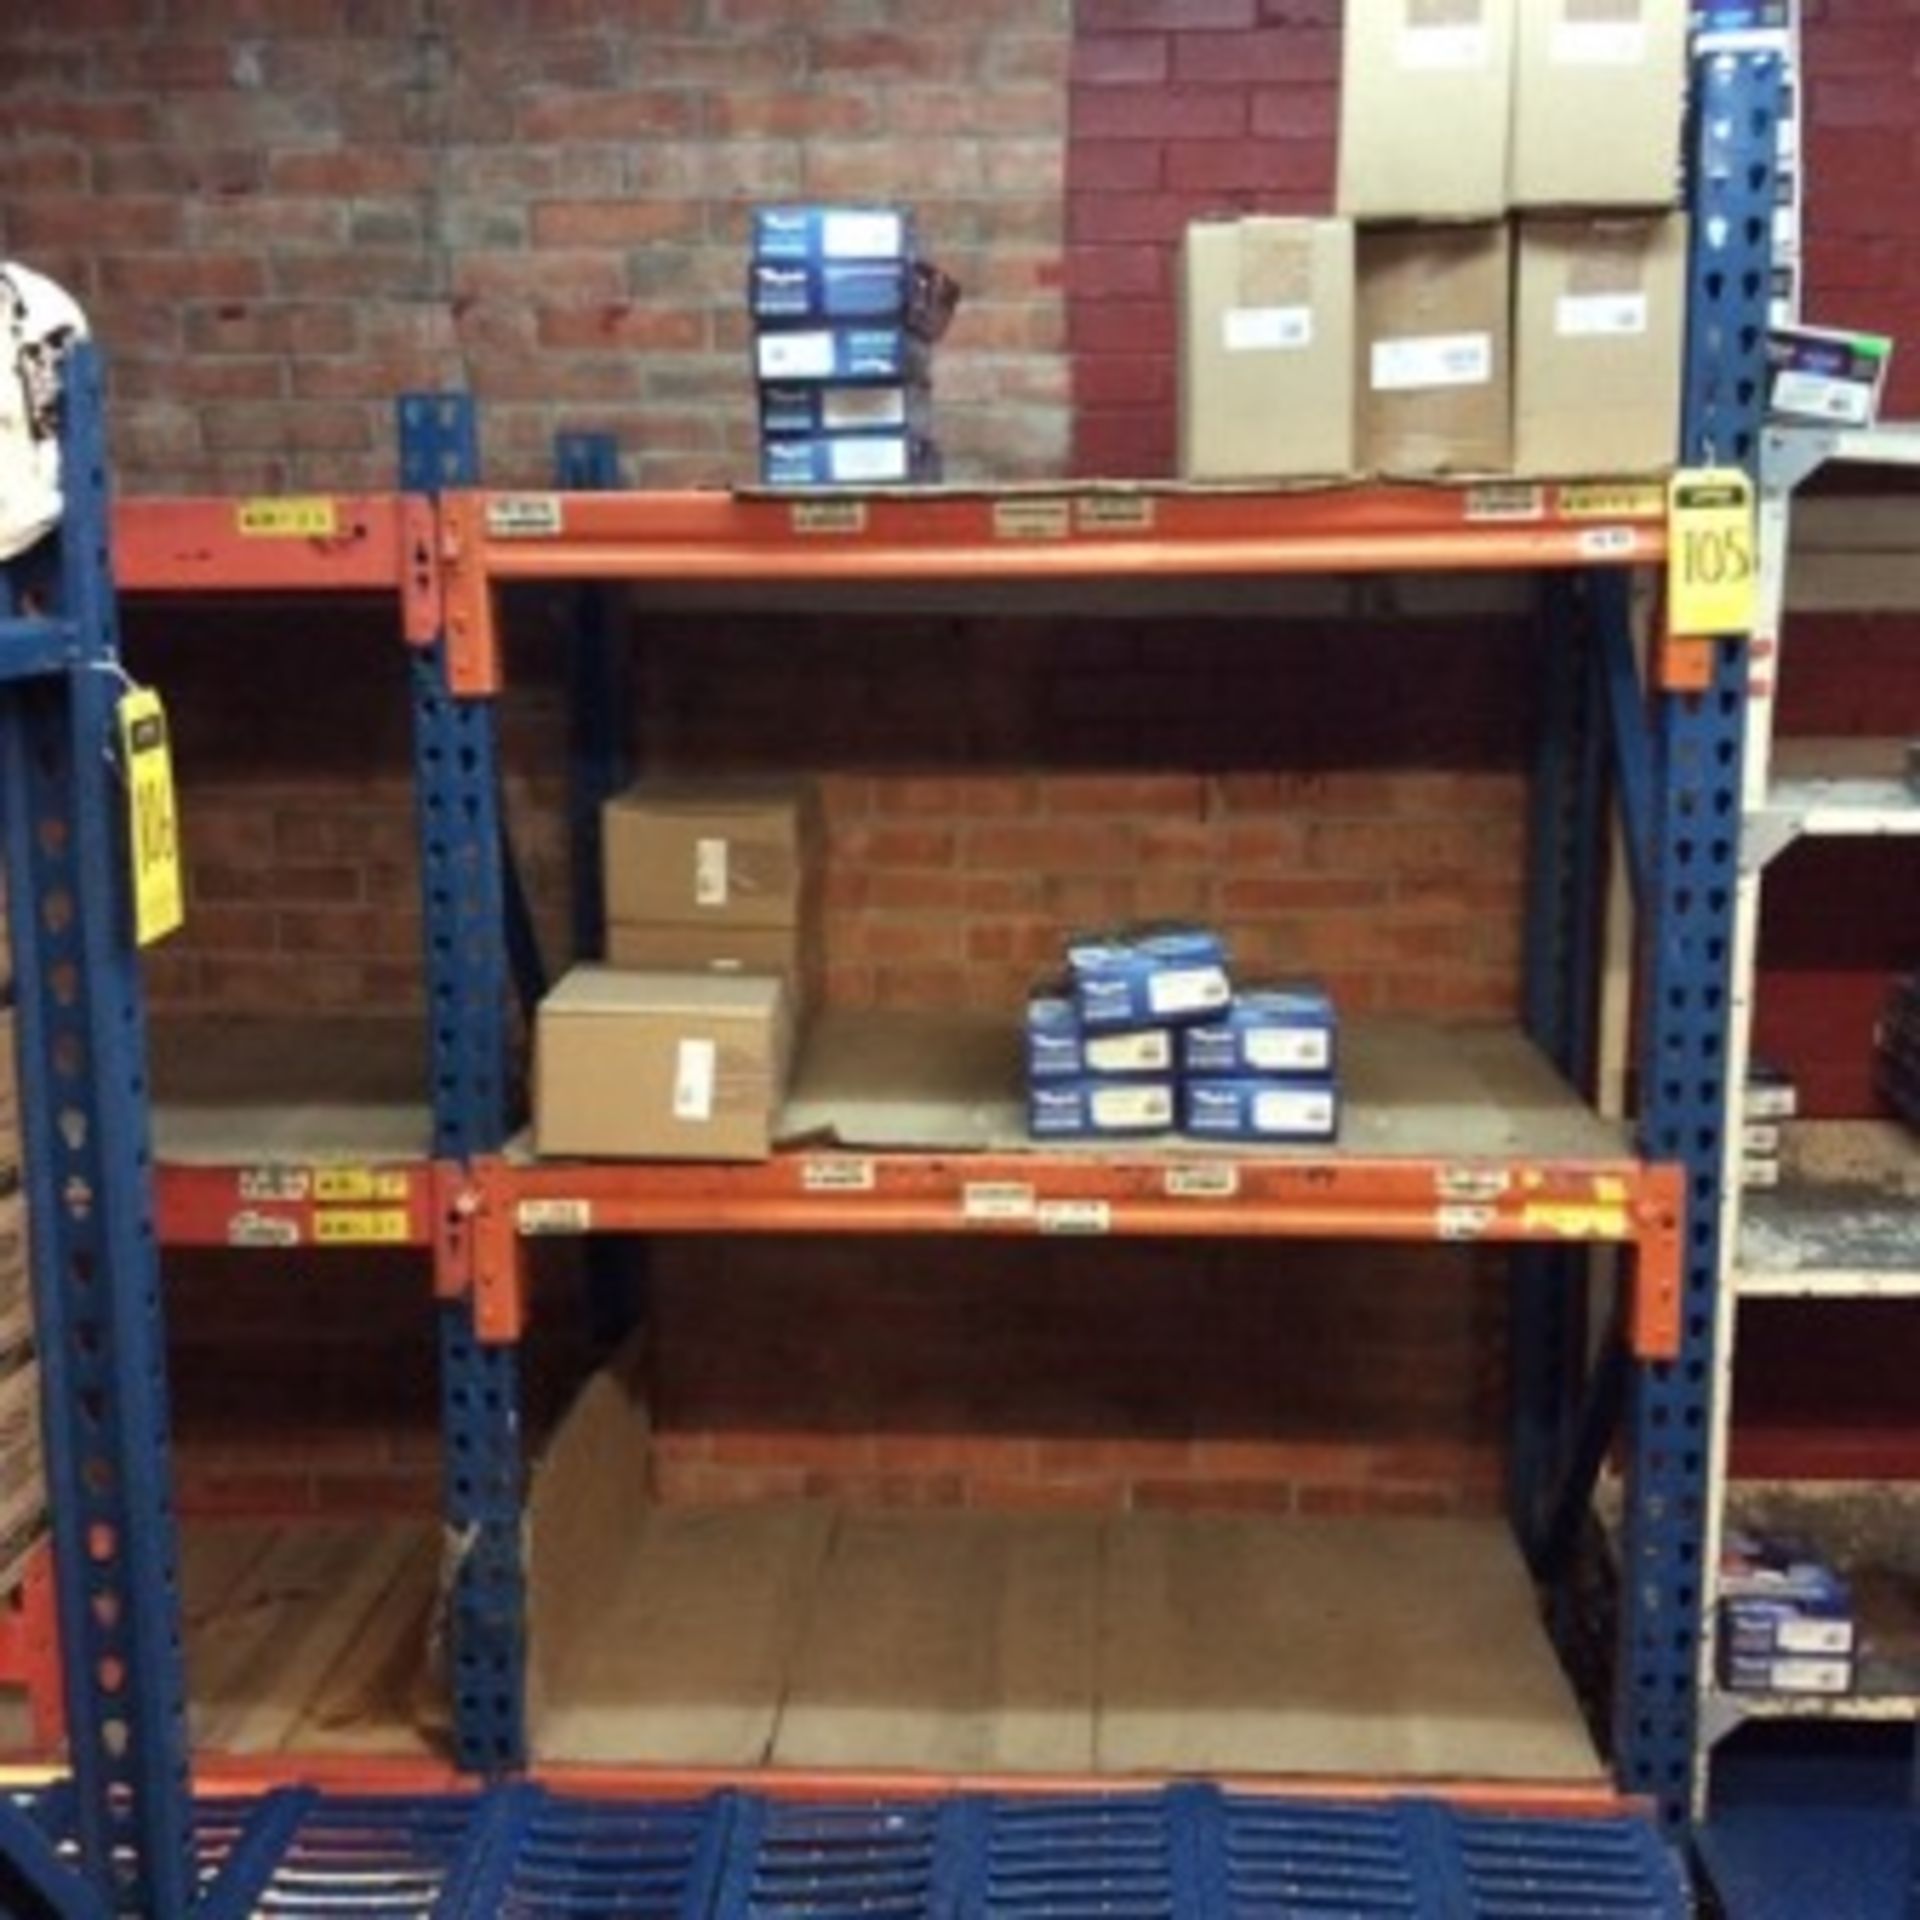 Vertical storage rack 19.0 m in front x 0.75 m in depth x 3.66 m in height consists of 5 levels, …